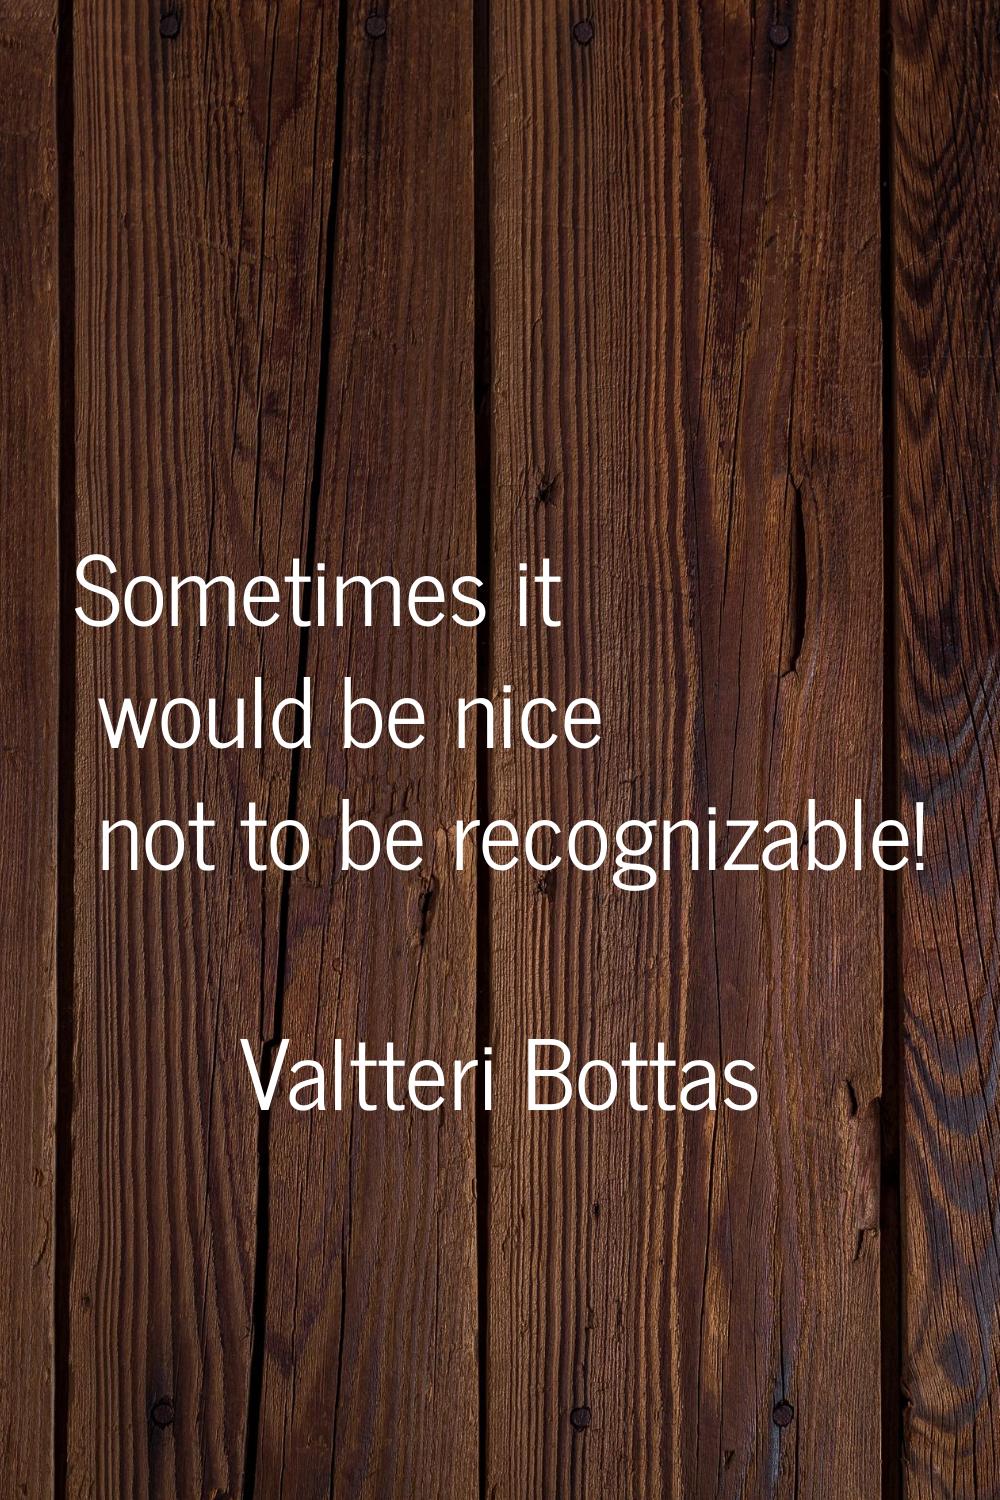 Sometimes it would be nice not to be recognizable!